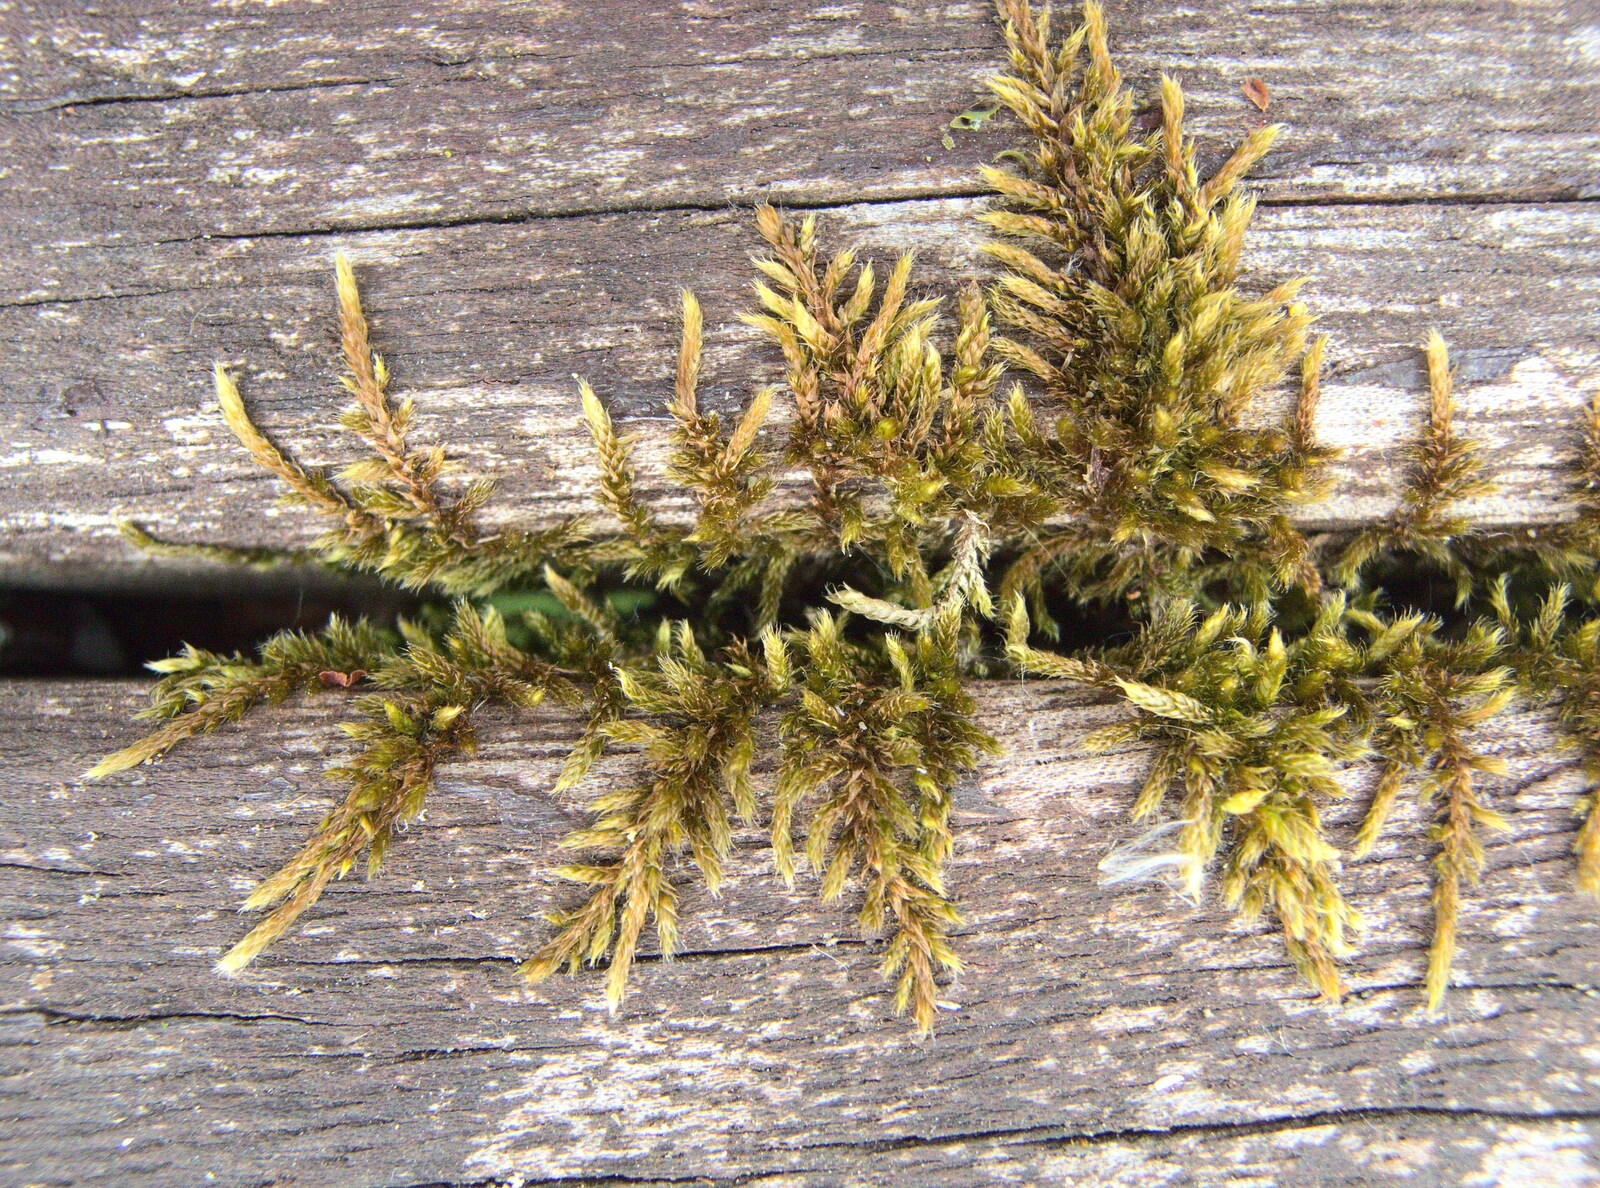 Cool moss grows up through a bench from The BSCC at the Wortwell Bell, Wortwell, Norfolk - 26th May 2016